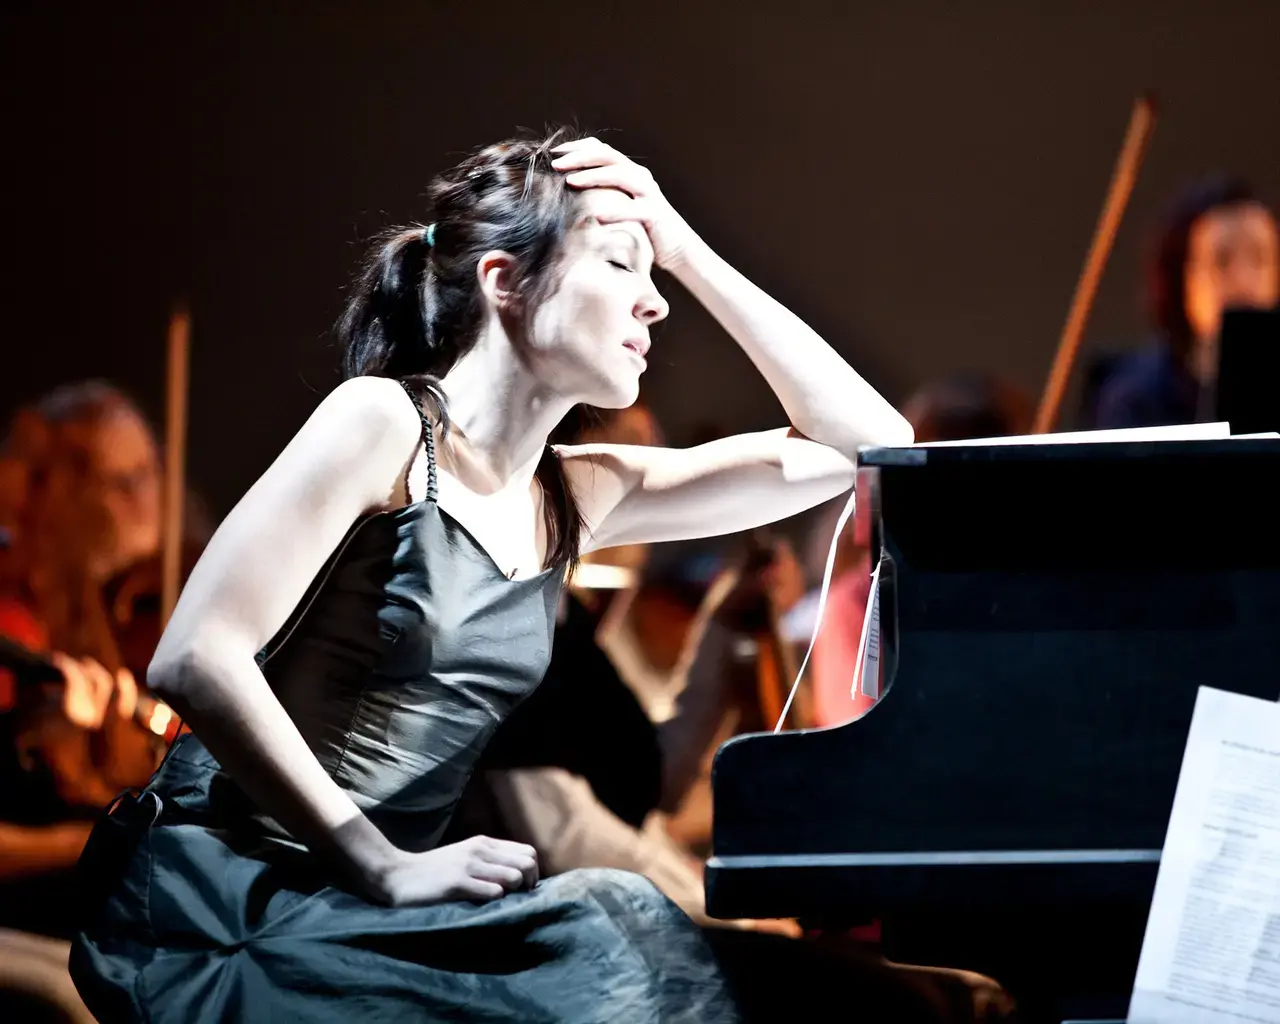 Chopin Without Piano, produced by Centrala, Warsaw, conceived and written by Michał Zadara and Barbara Wysocka, directed by Michał Zadara, Chopin performed by Barbara Wysocka. Photo by Natalia Kabanow.